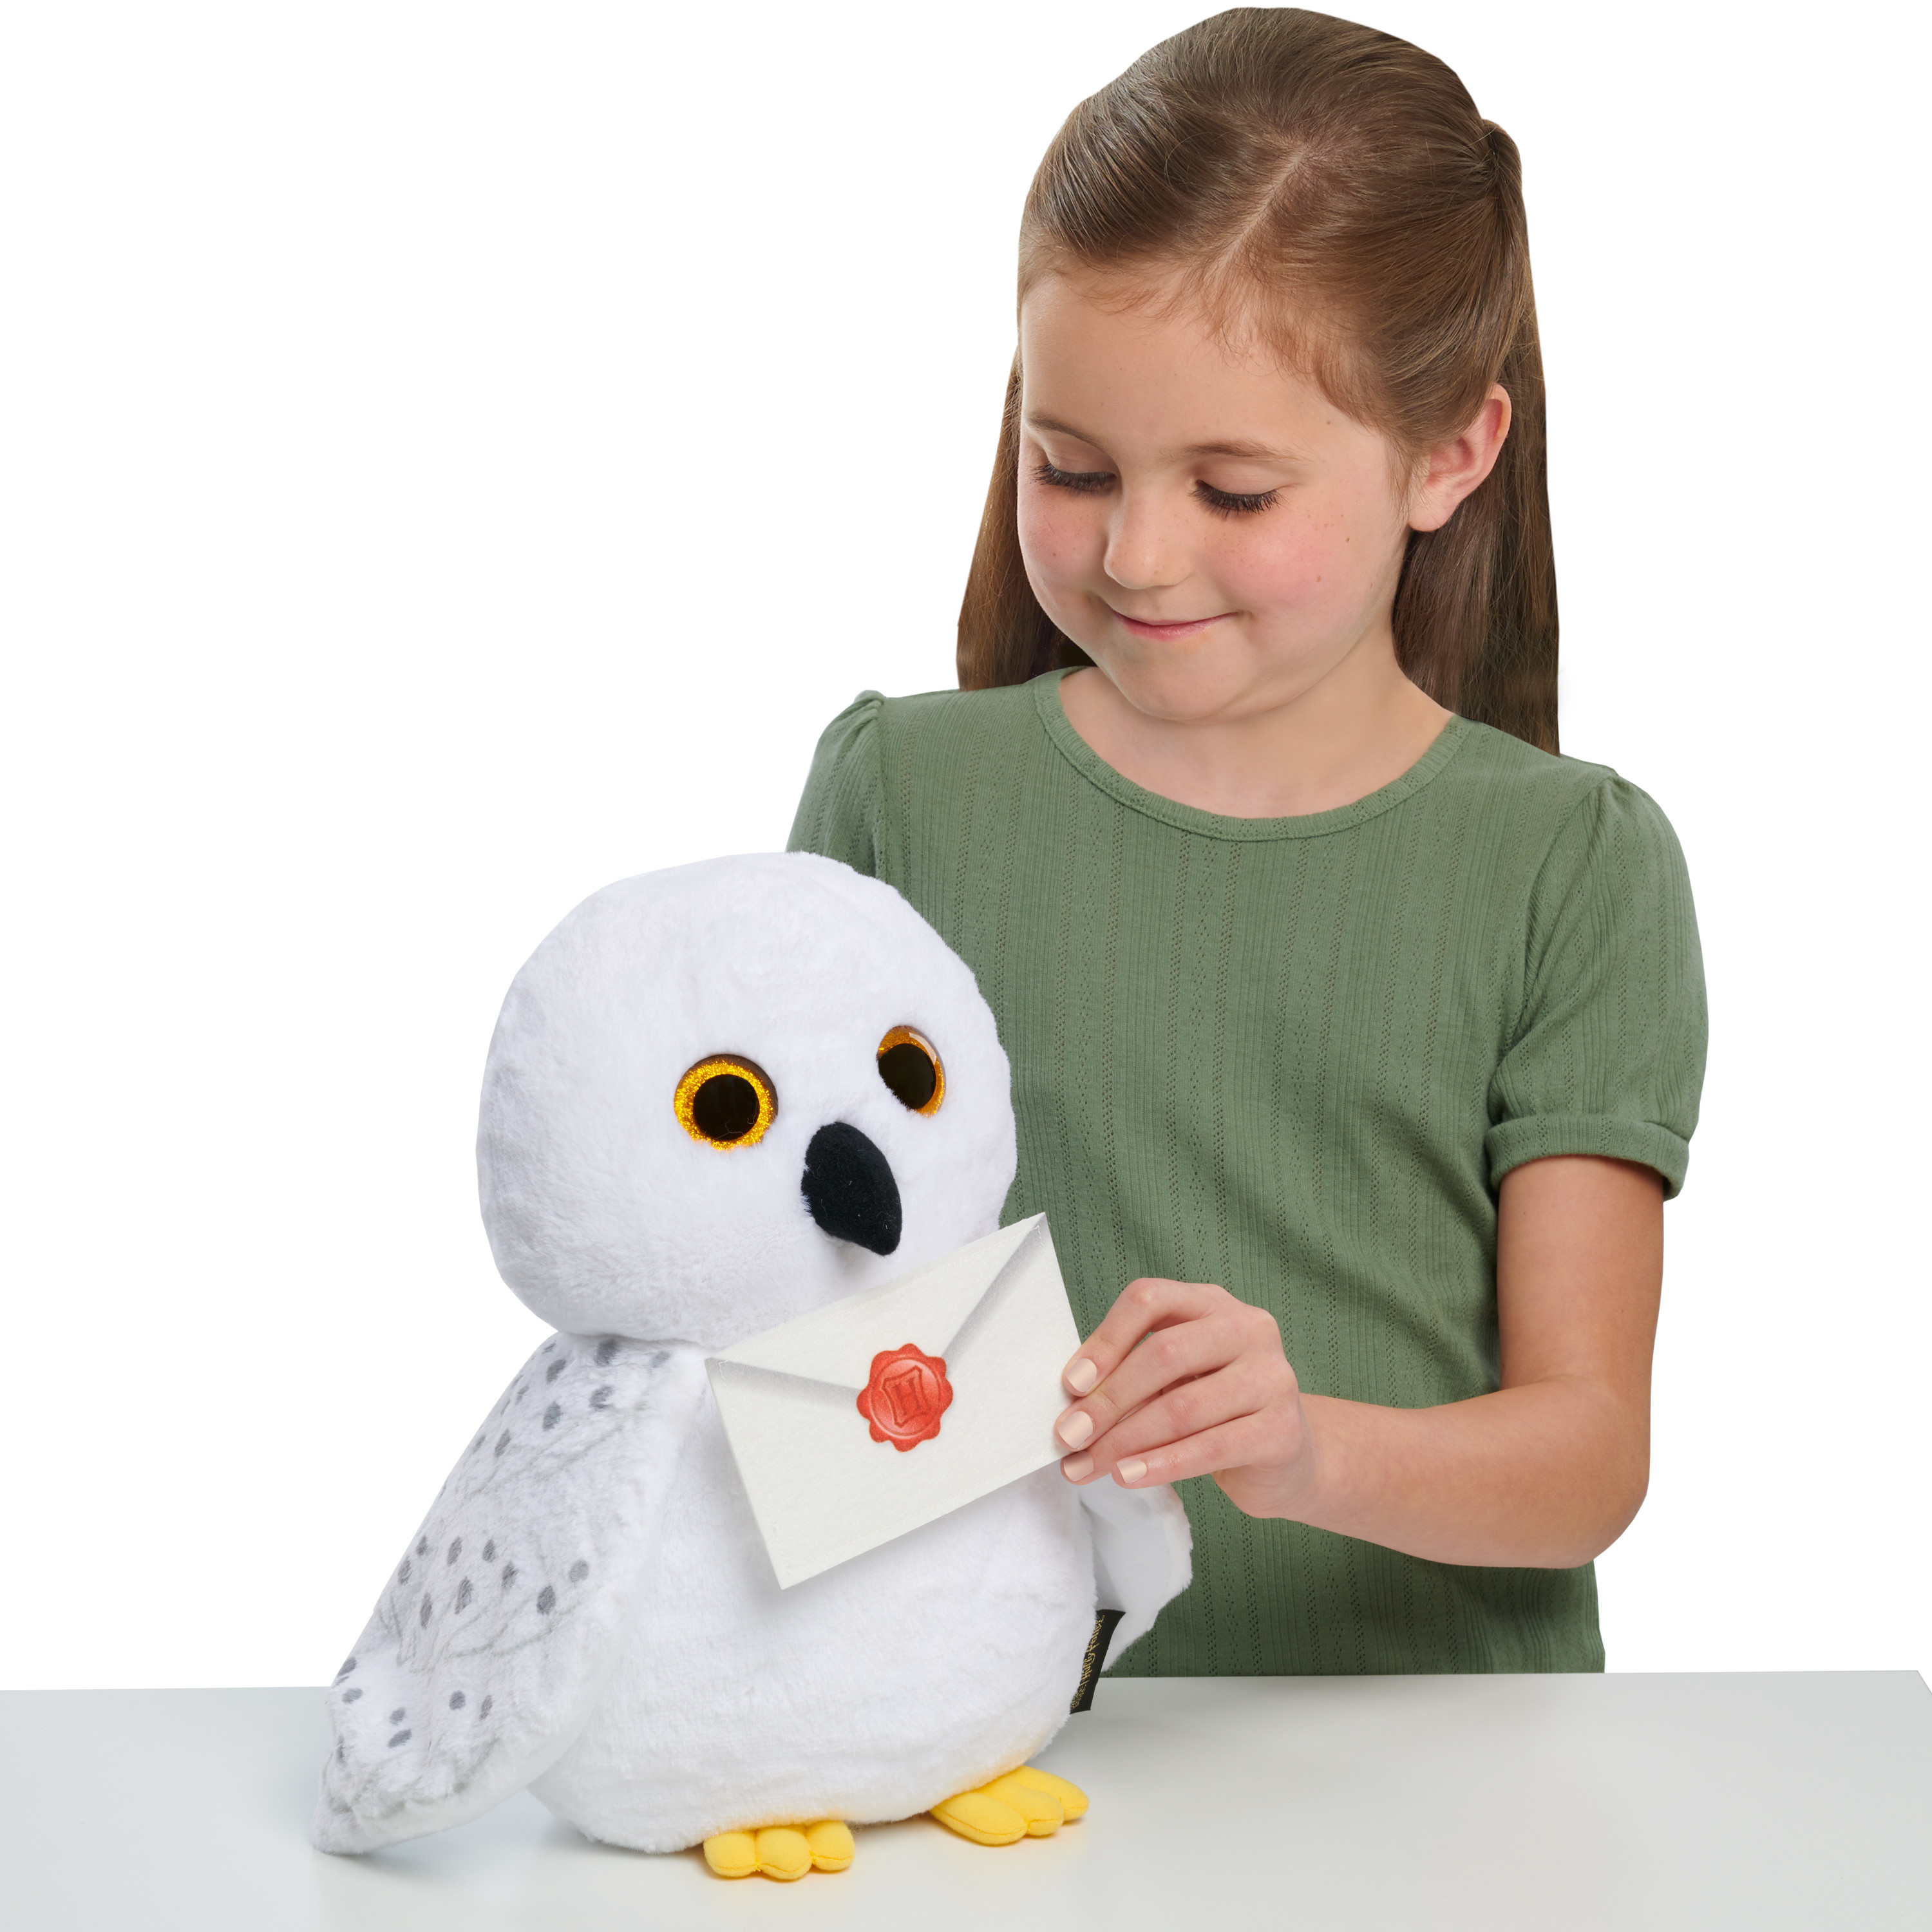 Harry Potter Collector Hedwig Plush Stuffed Owl Toy for Kids, White, Snowy Owl,  Kids Toys for Ages 3 Up, Gifts and Presents - image 2 of 4